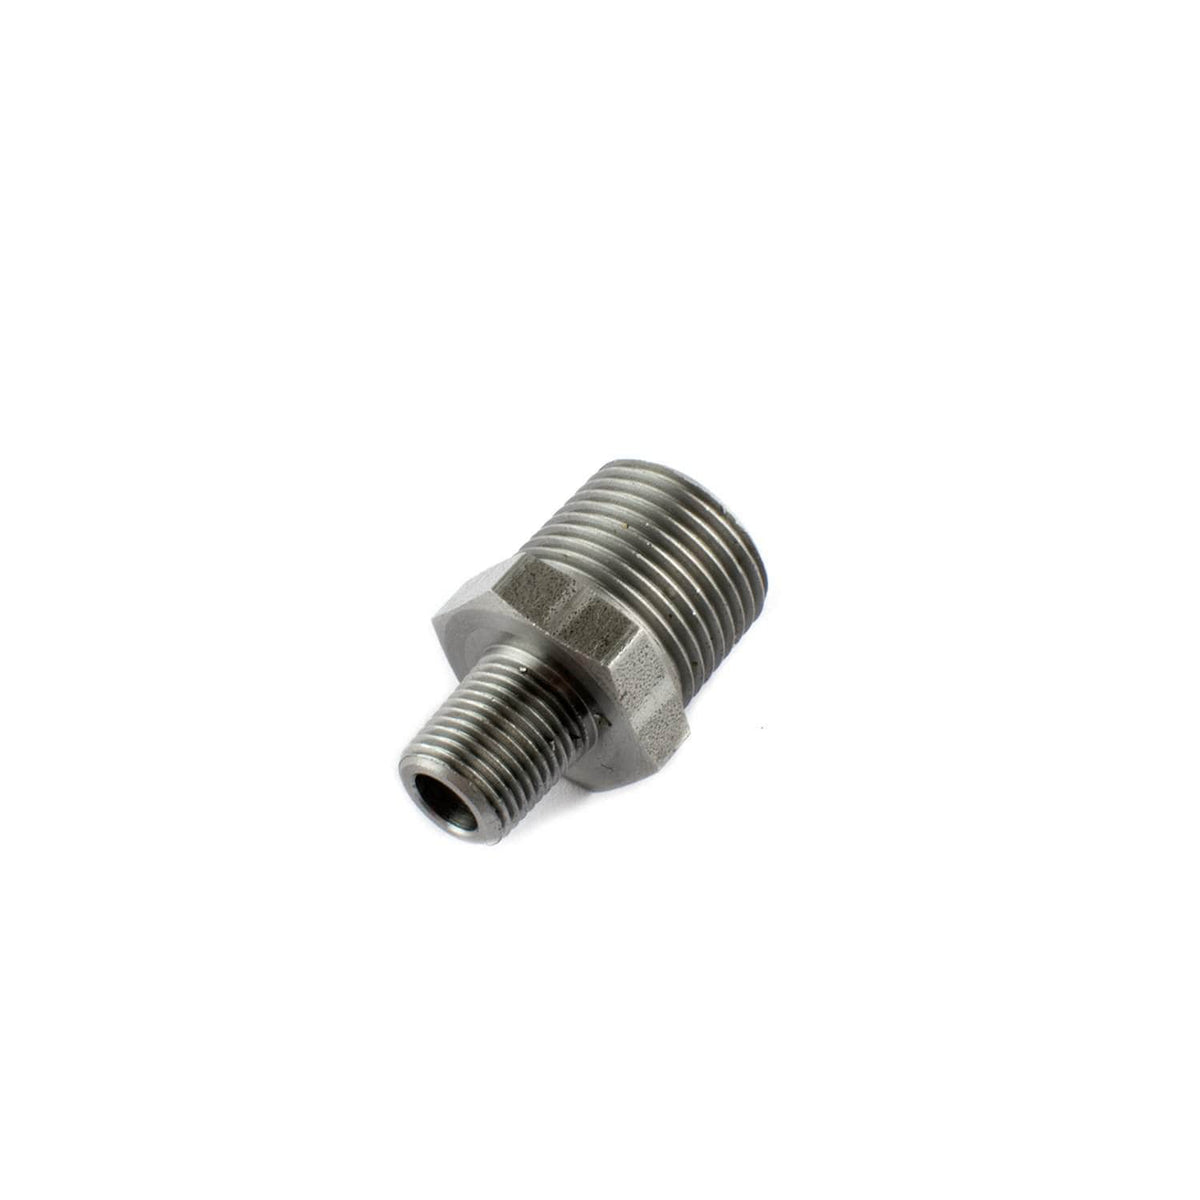 1/8&quot; x 3/8&quot; BSP connector for use with Shallow Well oil Aga range cookers